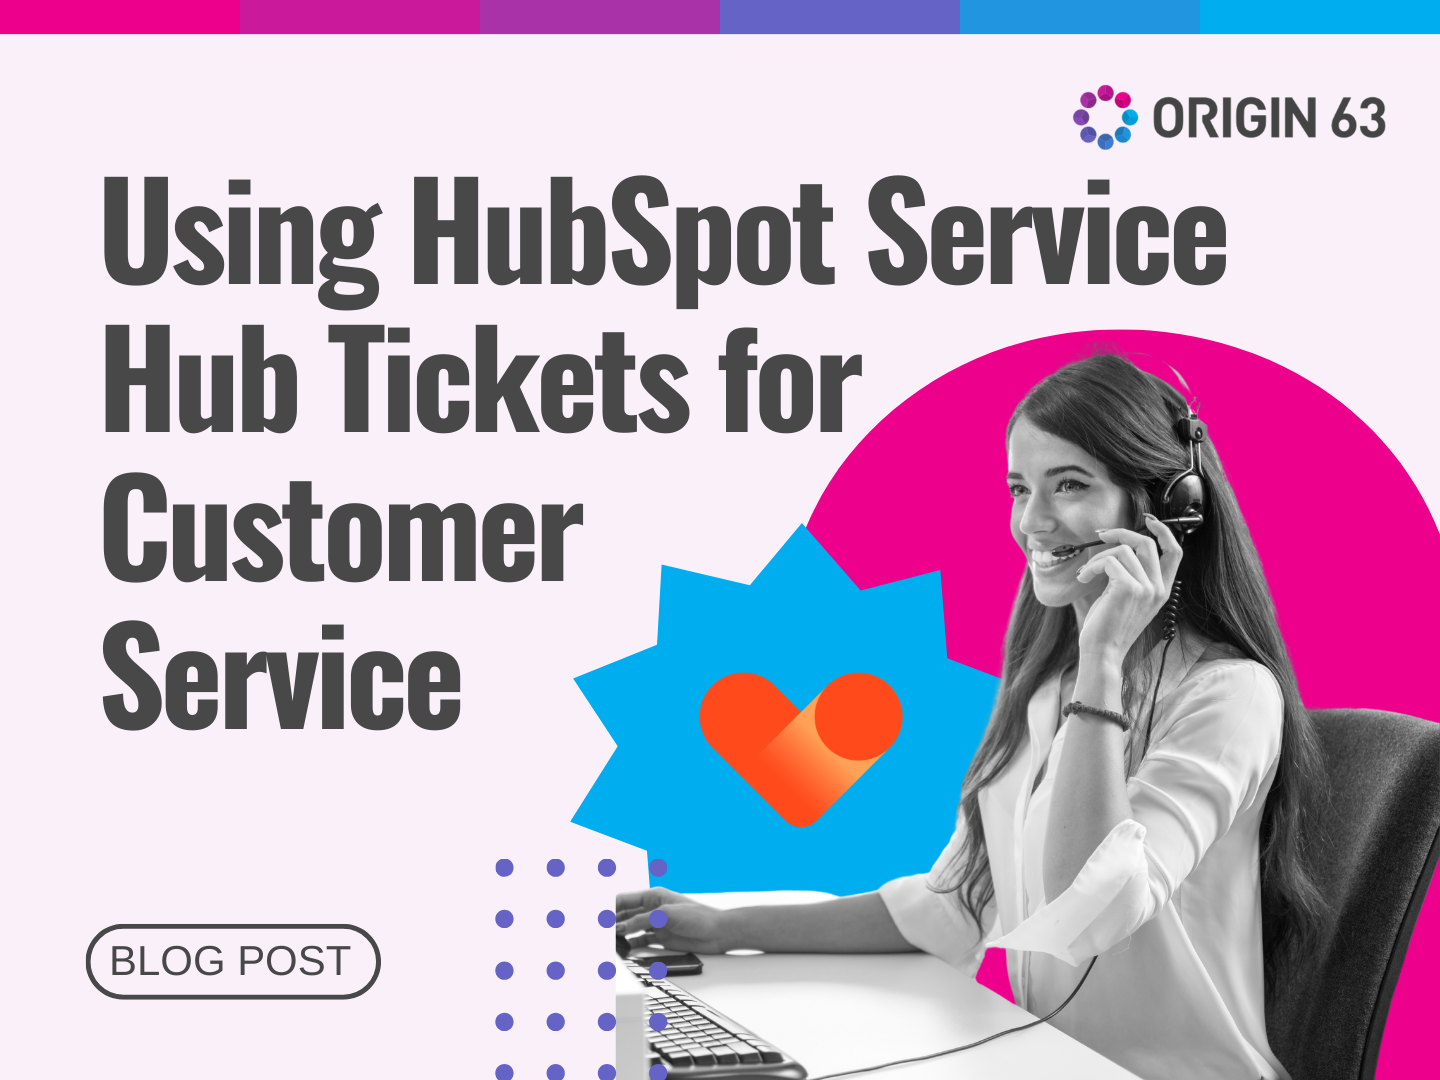 Learn to use HubSpot Service Hub’s ticketing system to streamline support through organized issue tracking and collaboration. 